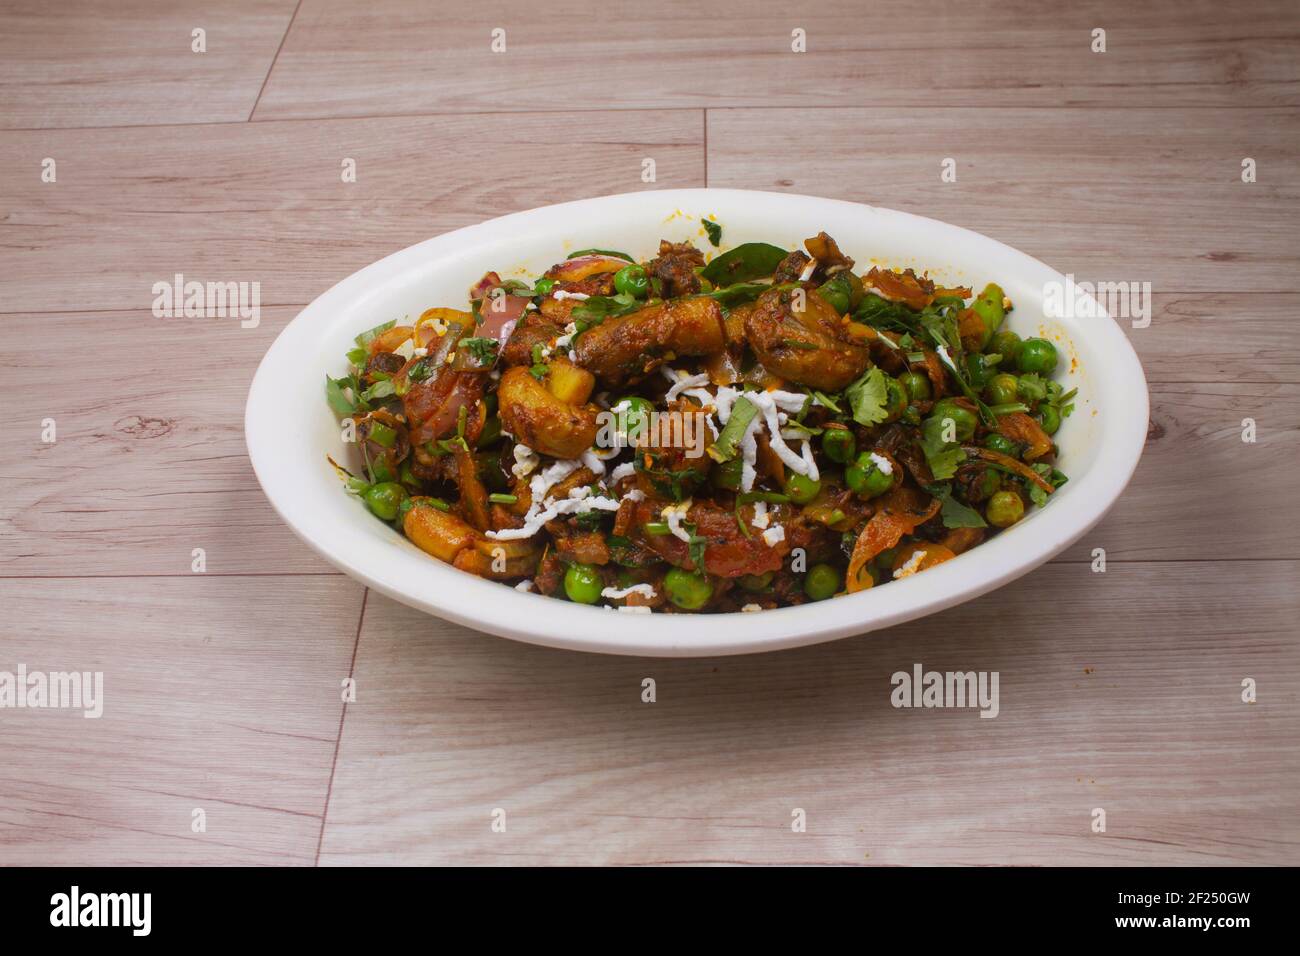 Paneer Chilis is an Indian dish, paneer cubes with tomatoes, onions, spring onions, chilli sauce. served on rustic wooden background, selective focus Stock Photo